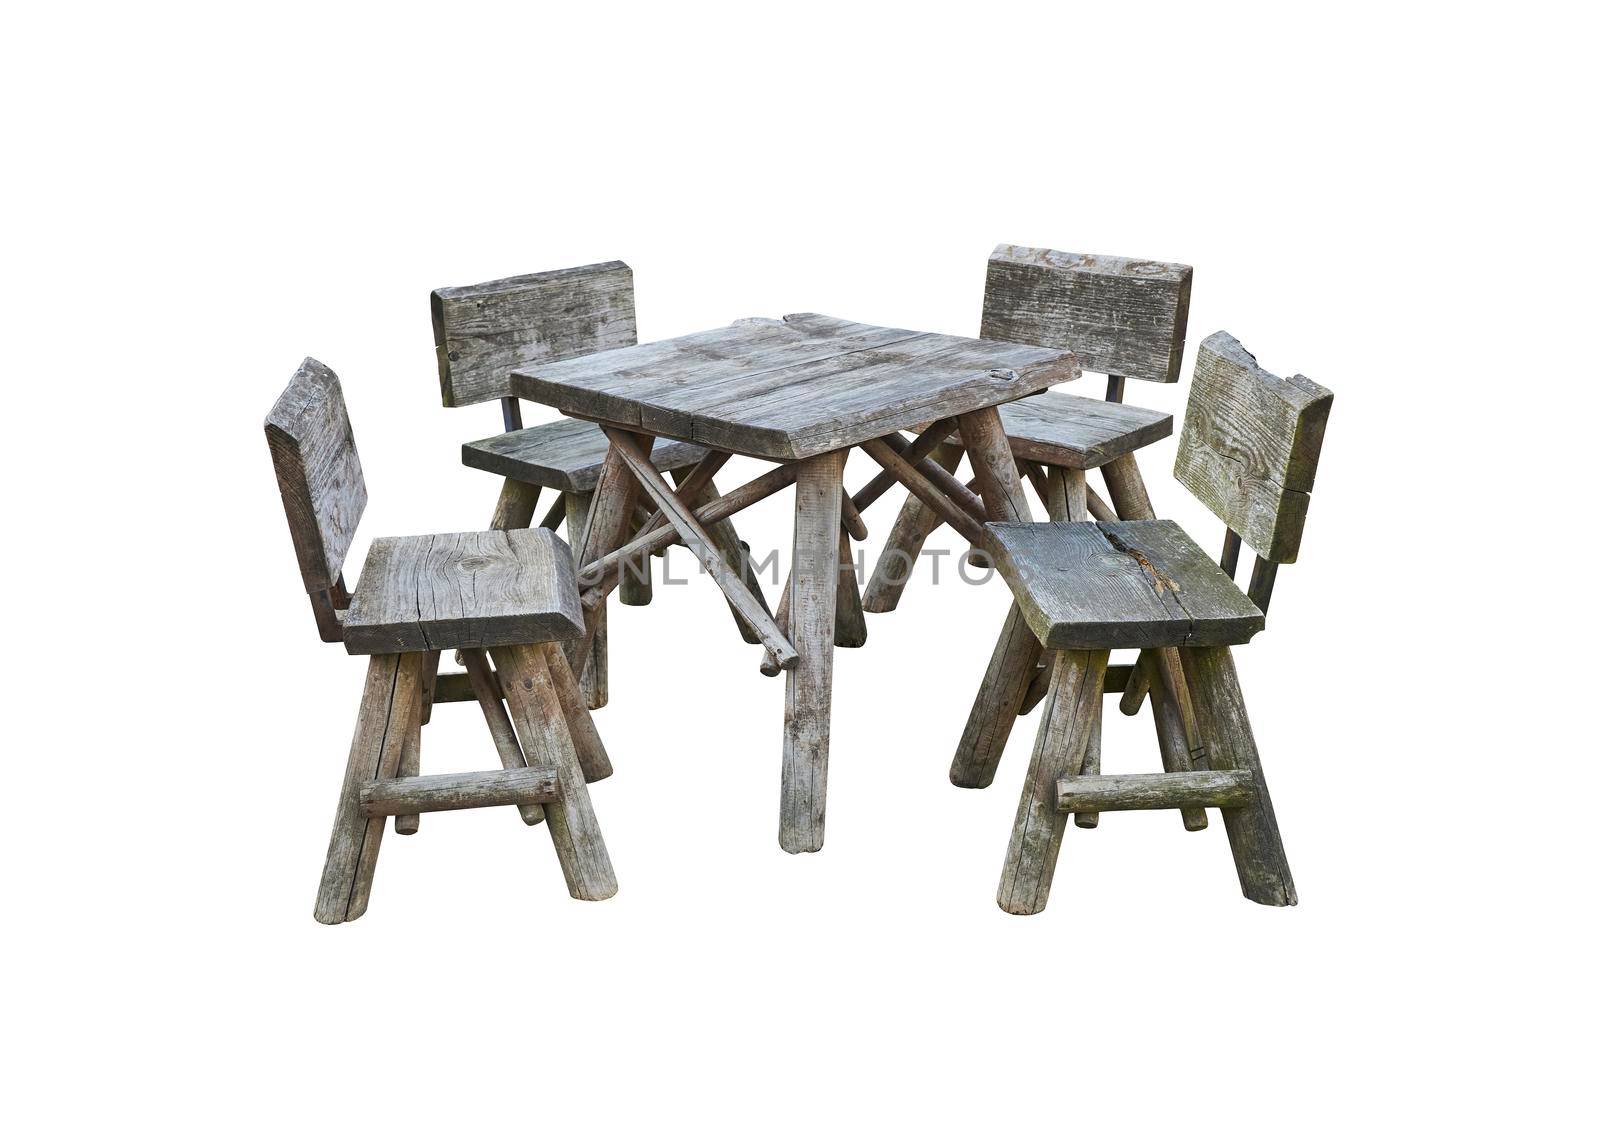 Old wooden outdoor table and chairs on a white background.